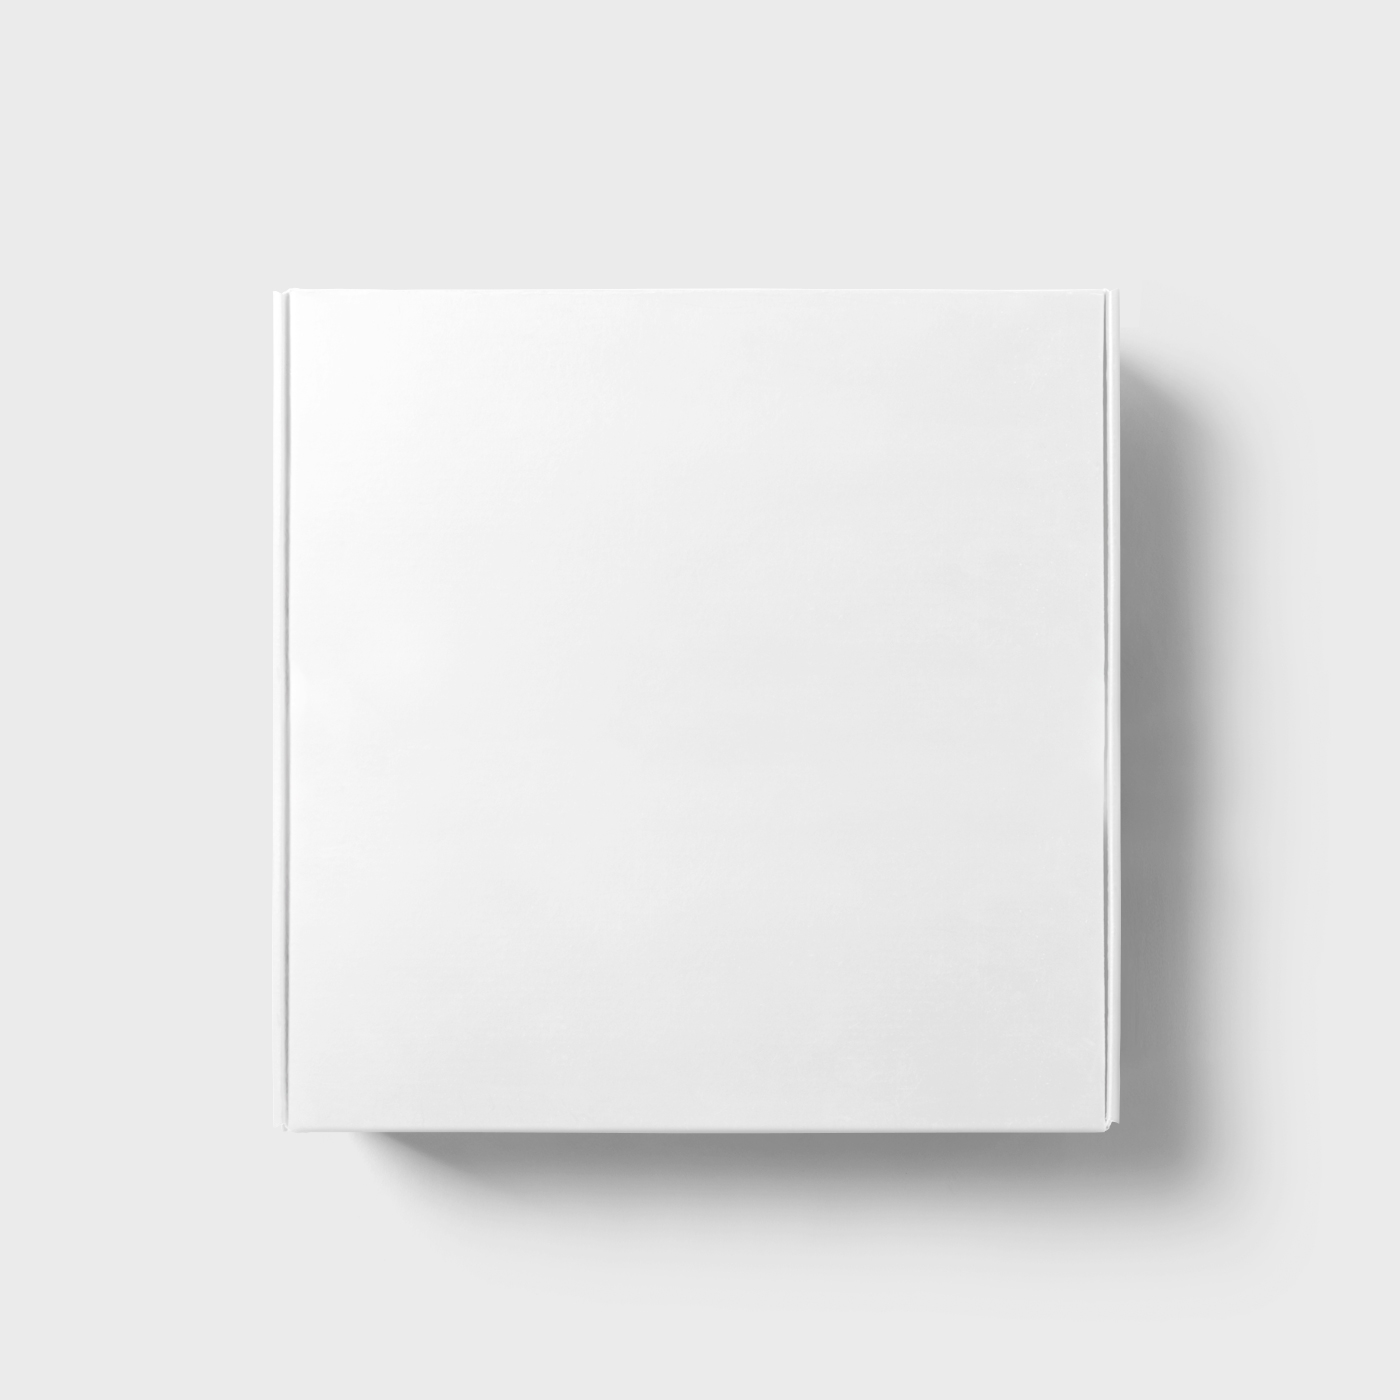 Top View of Simple Square Box Mockup FREE PSD